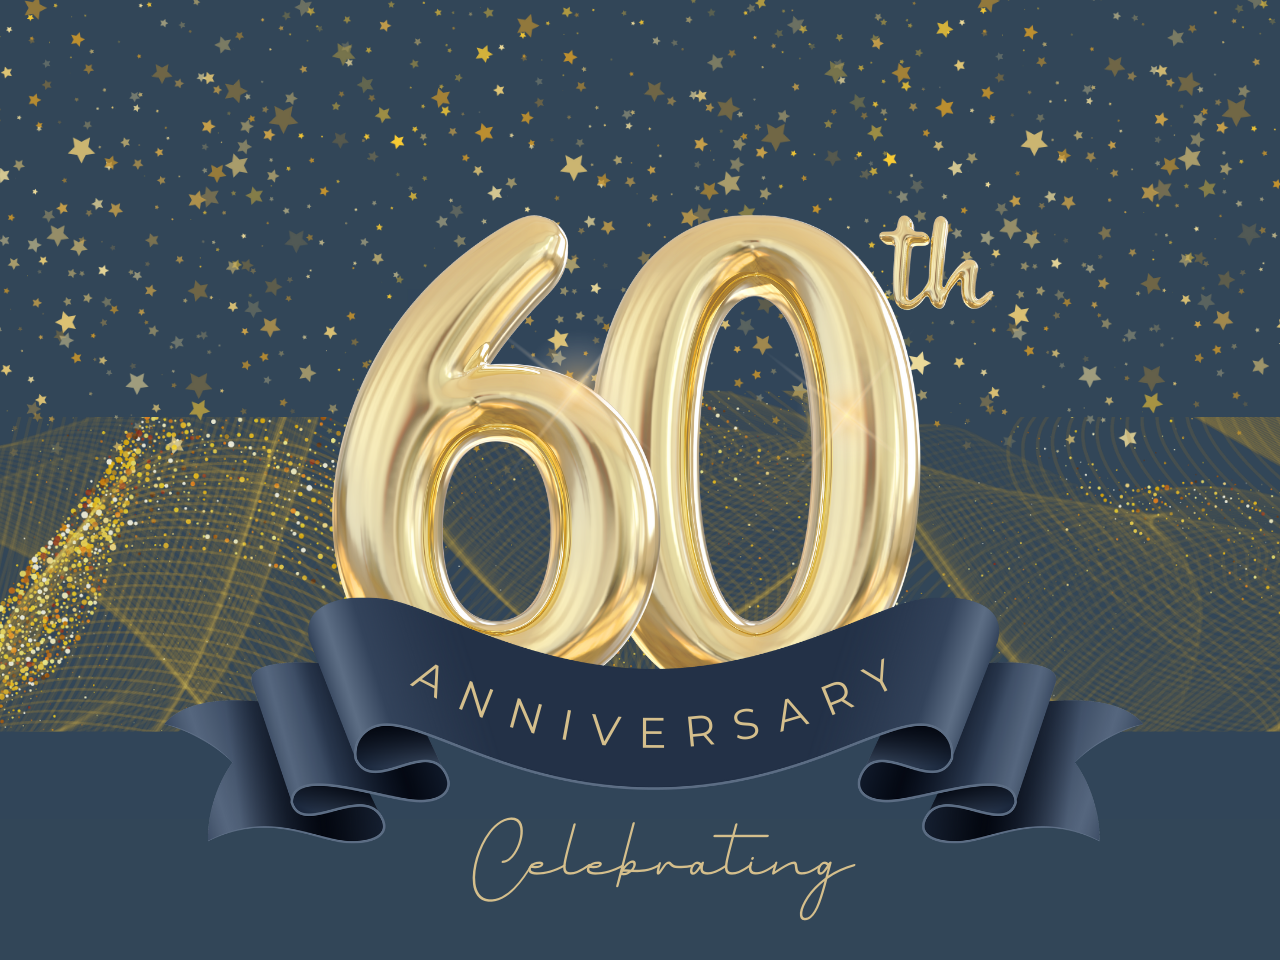 60th Anniversary Giveaway Winners